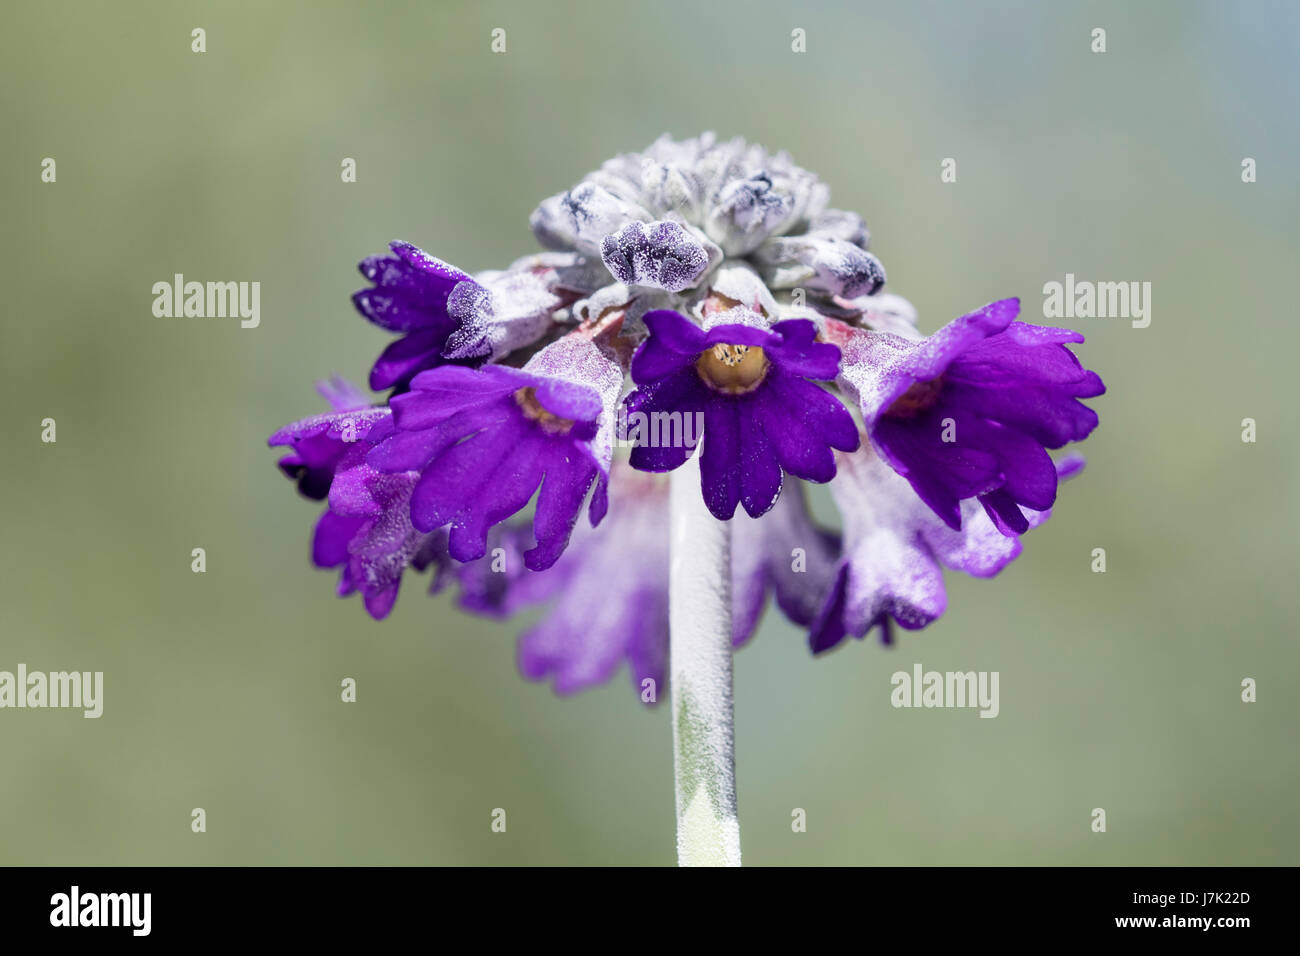 Flower head of the short lived perennial asiatic primrose, Primula capitata, showing the purple flowers and white farina coating on the stem and buds Stock Photo